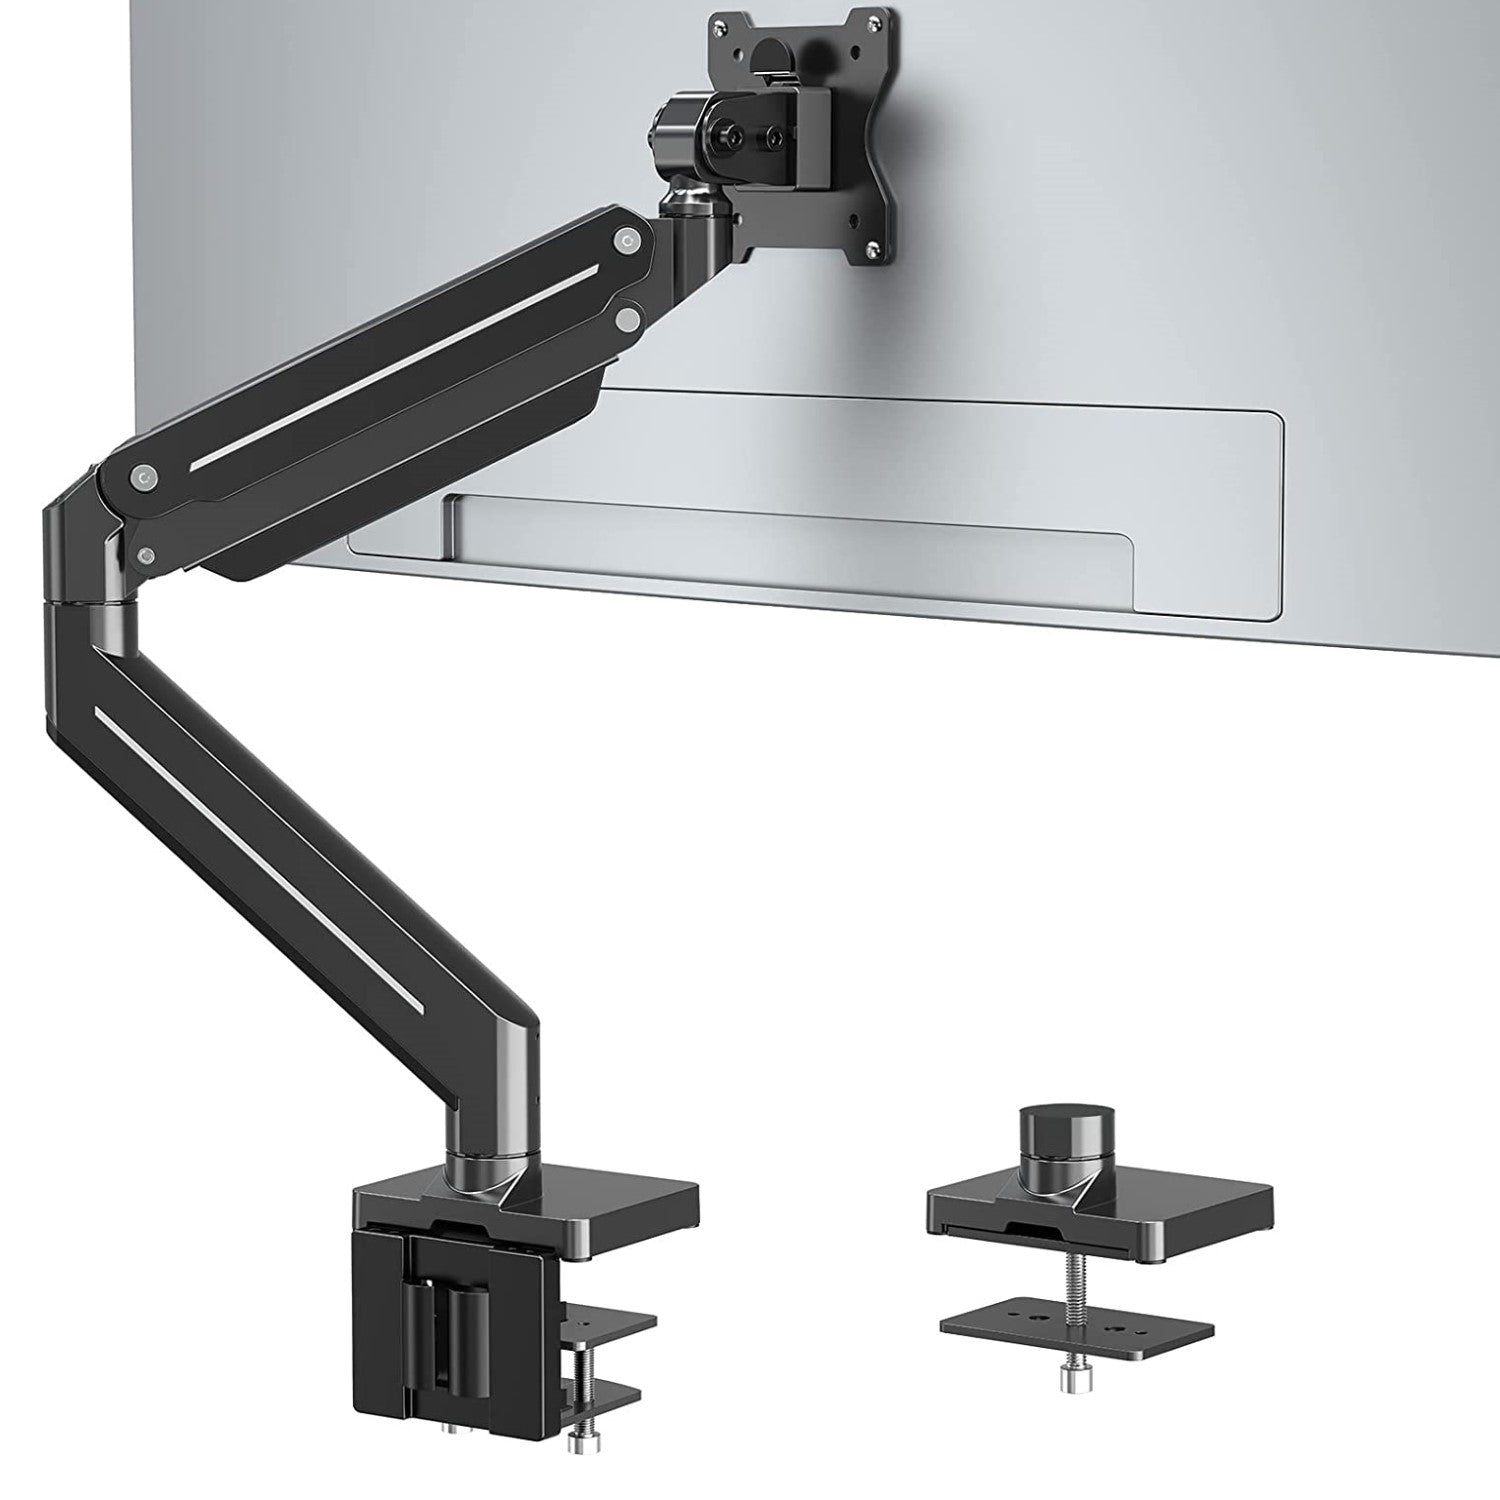 MOUNTUP Single Monitor Desk Mount With Gas Spring Arm for 42'' Monitor